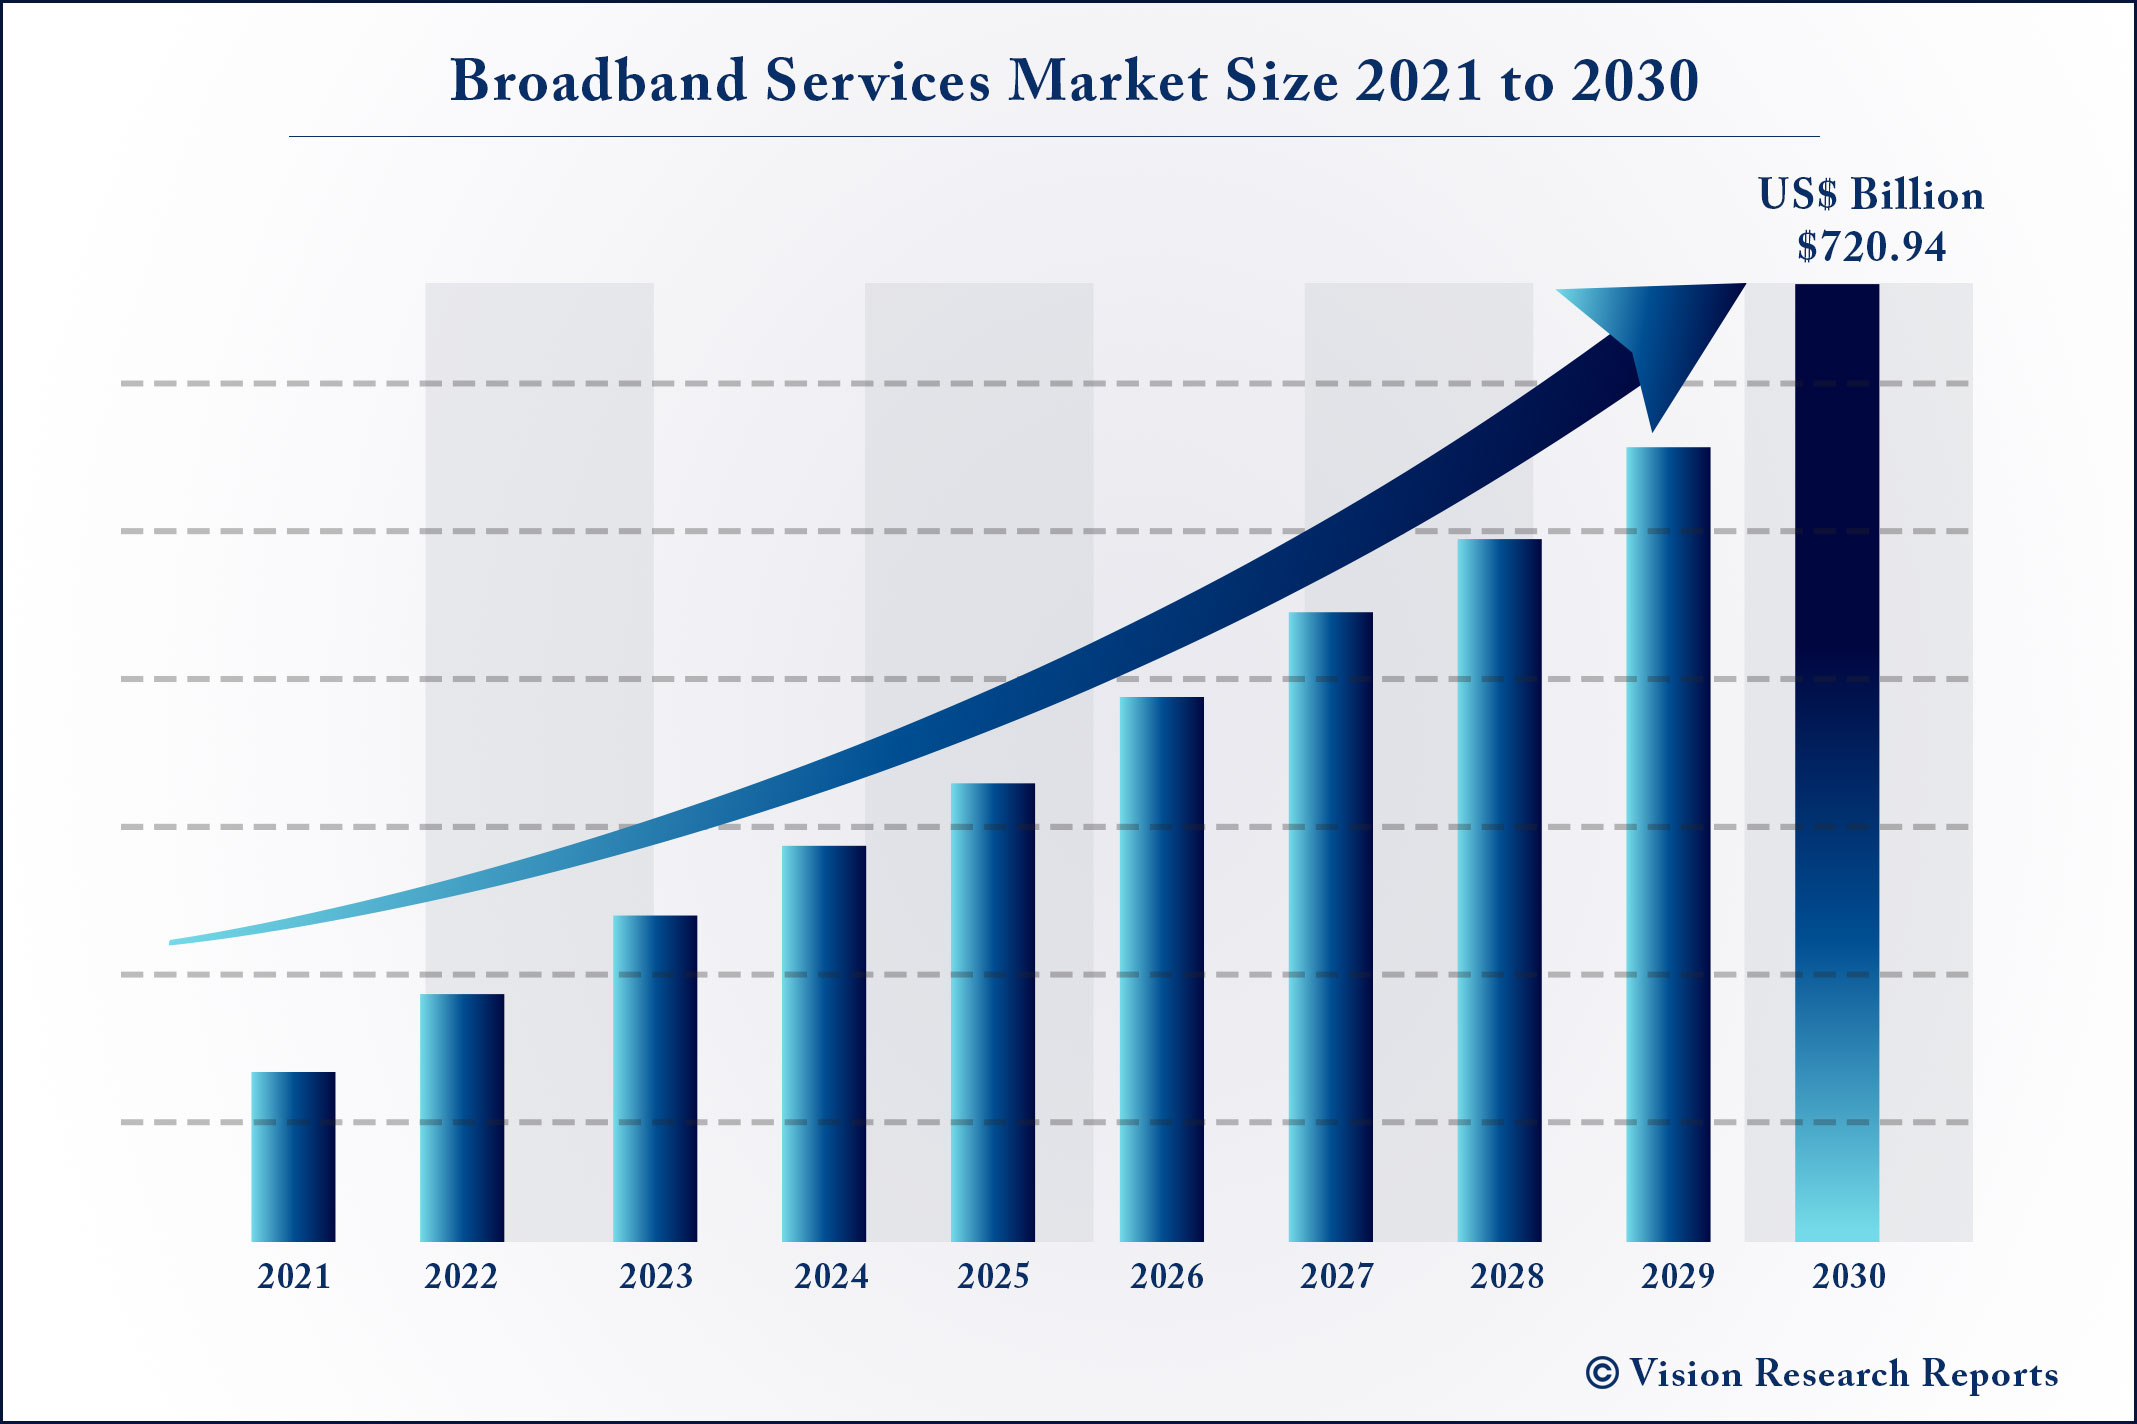 Broadband Services Market Size 2021 to 2030